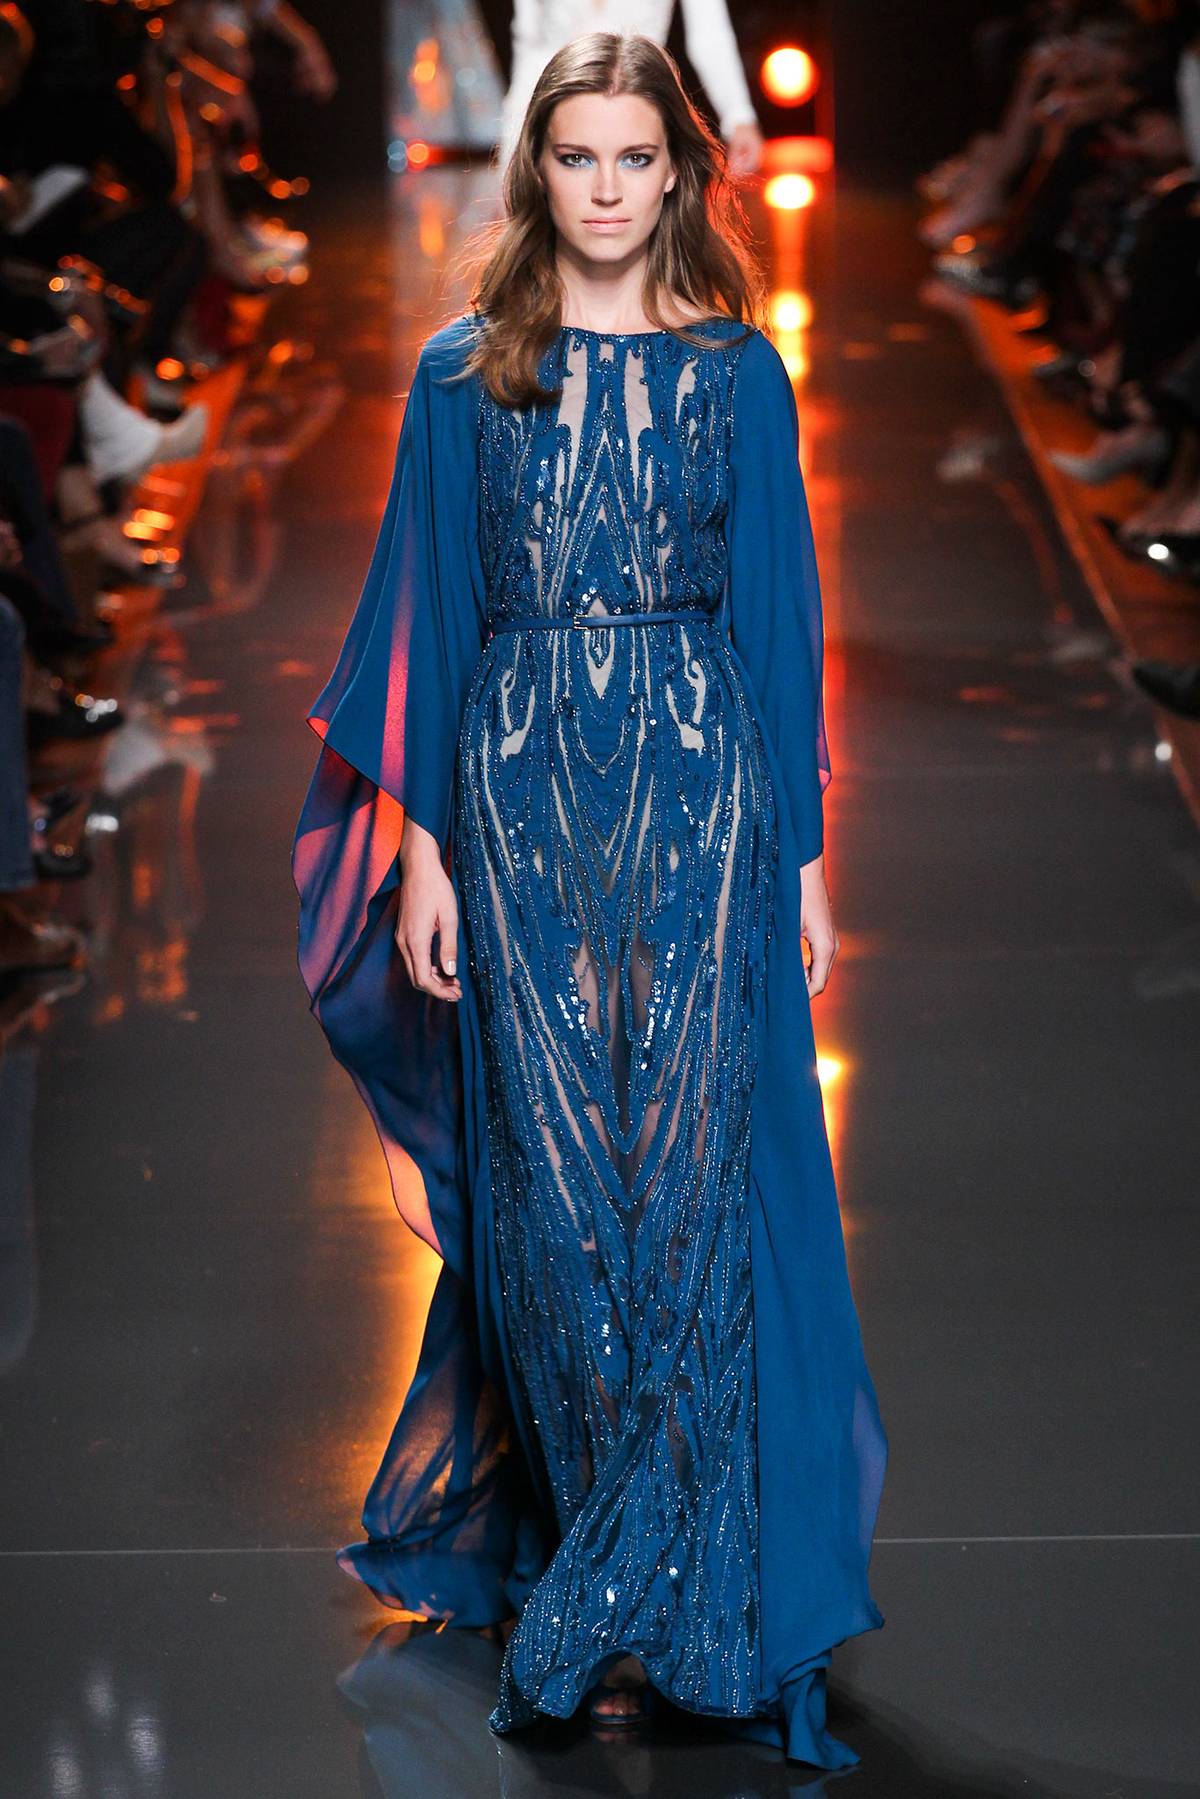 Elie Saab Spring 2015 is an Invitation to 'Dive Into the Deep' | SENATUS